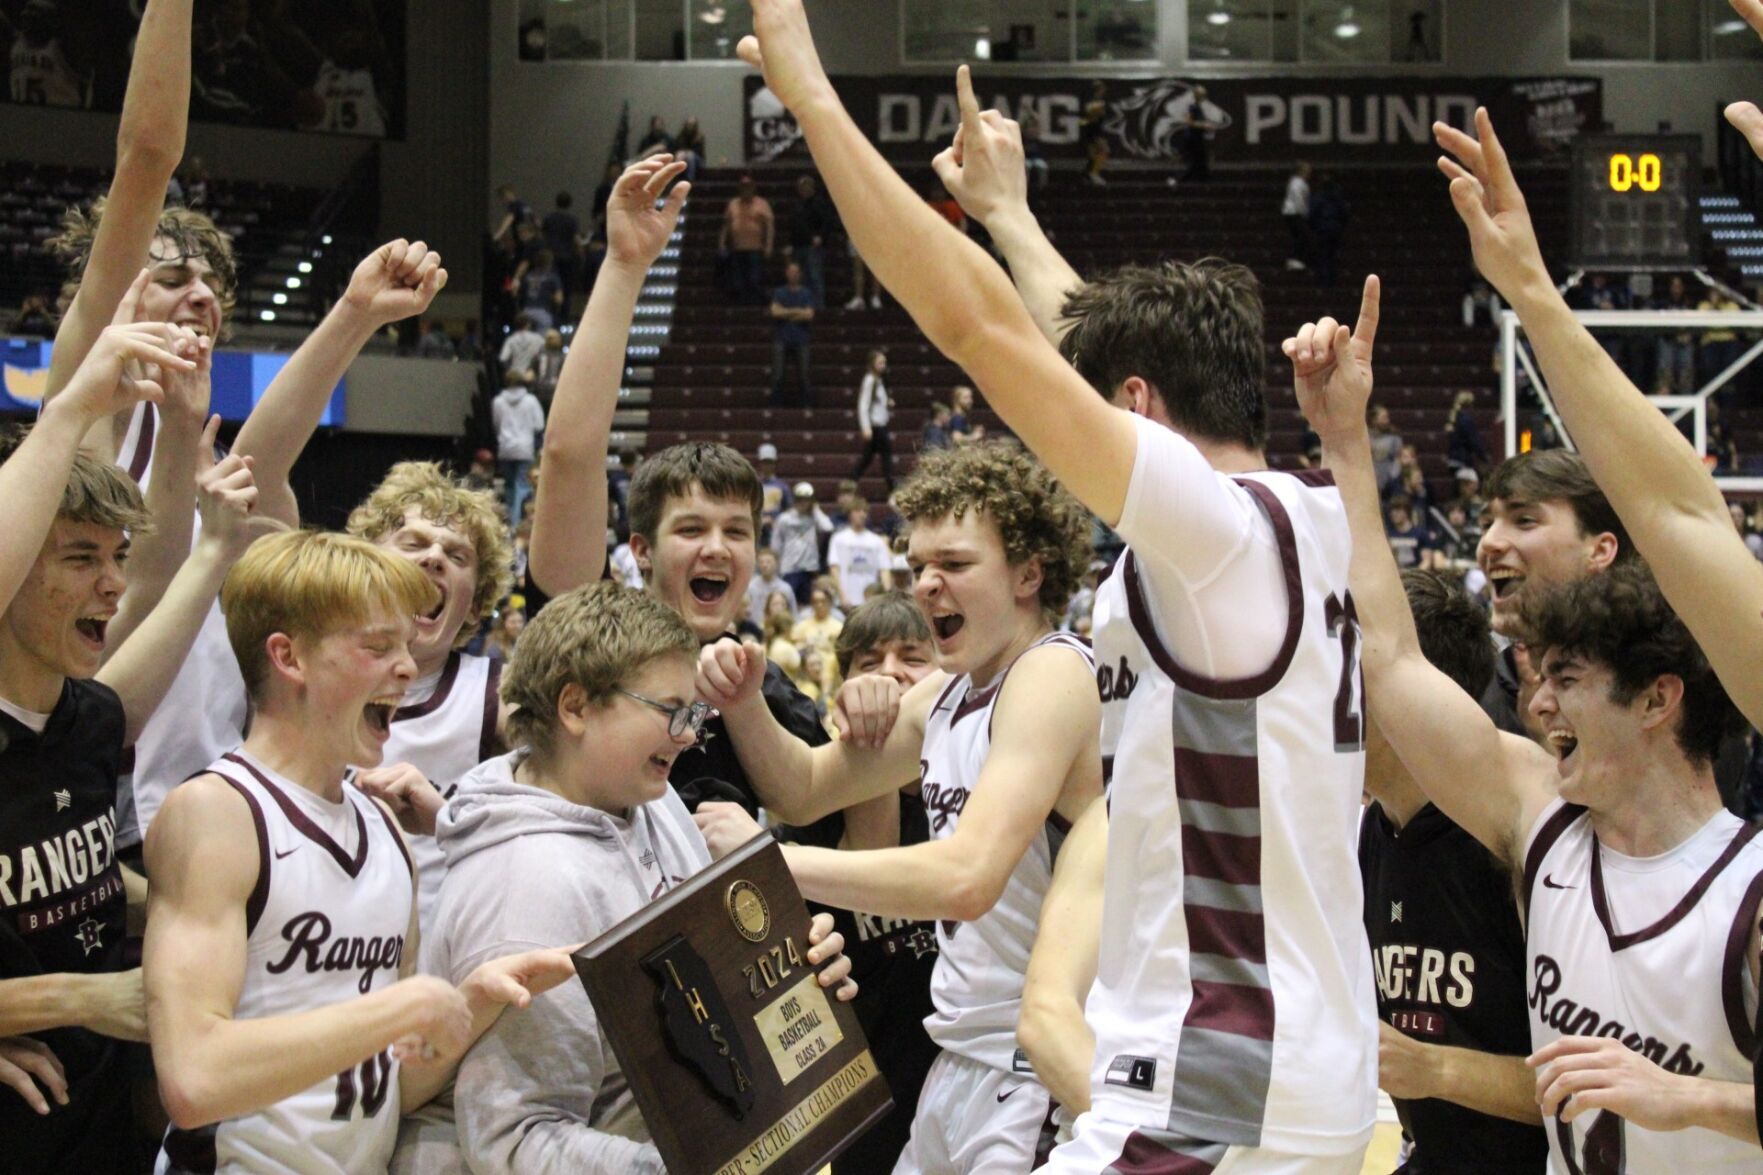 Benton Rangers Secure Final Four Spot After Defeating Teutopolis in Super-Sectional Game